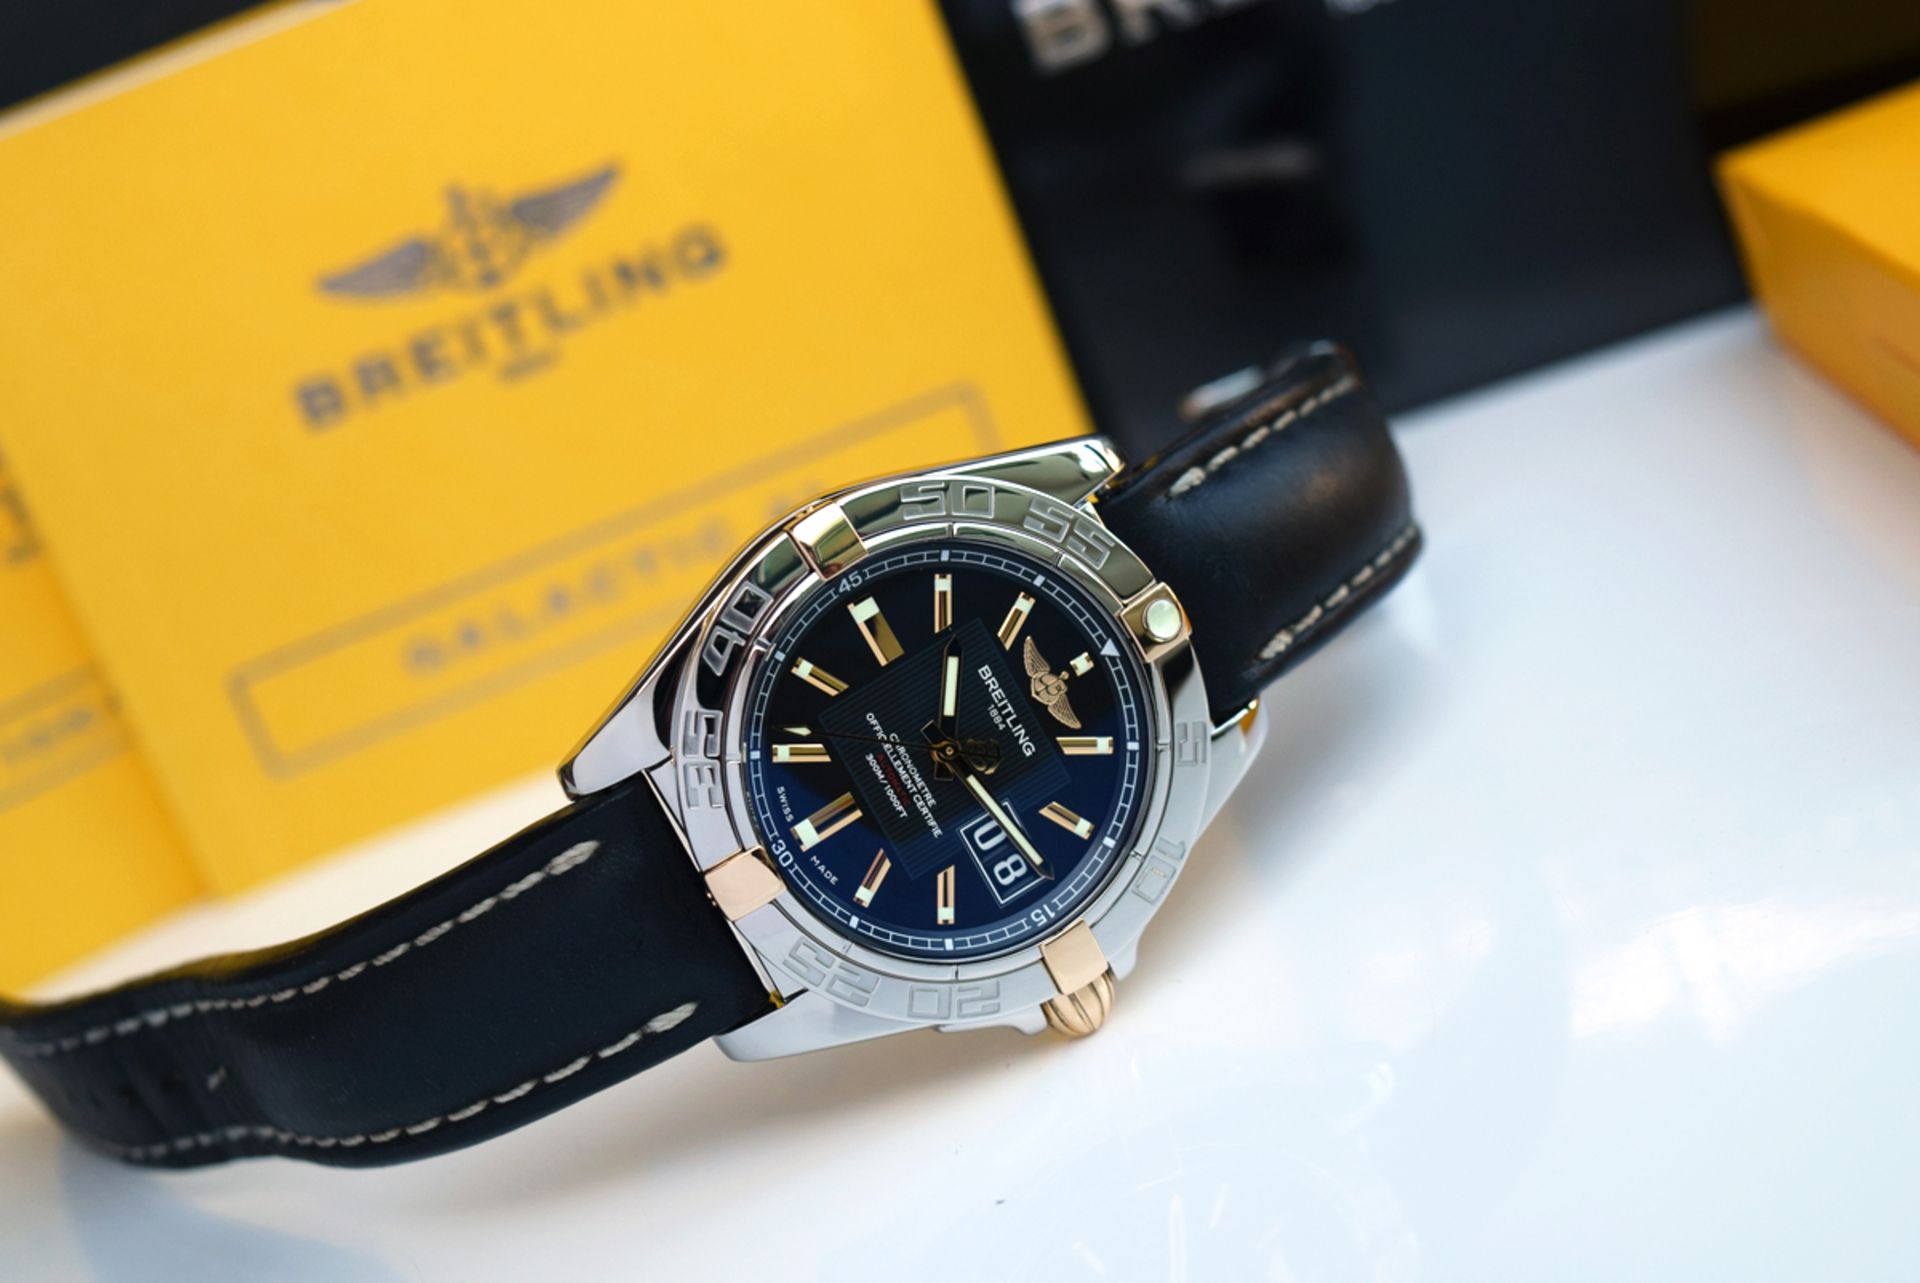 BREITLING - GALACTIC 41 (B49350) - 18K GOLD & STEEL with BLACK DIAL - Image 11 of 13